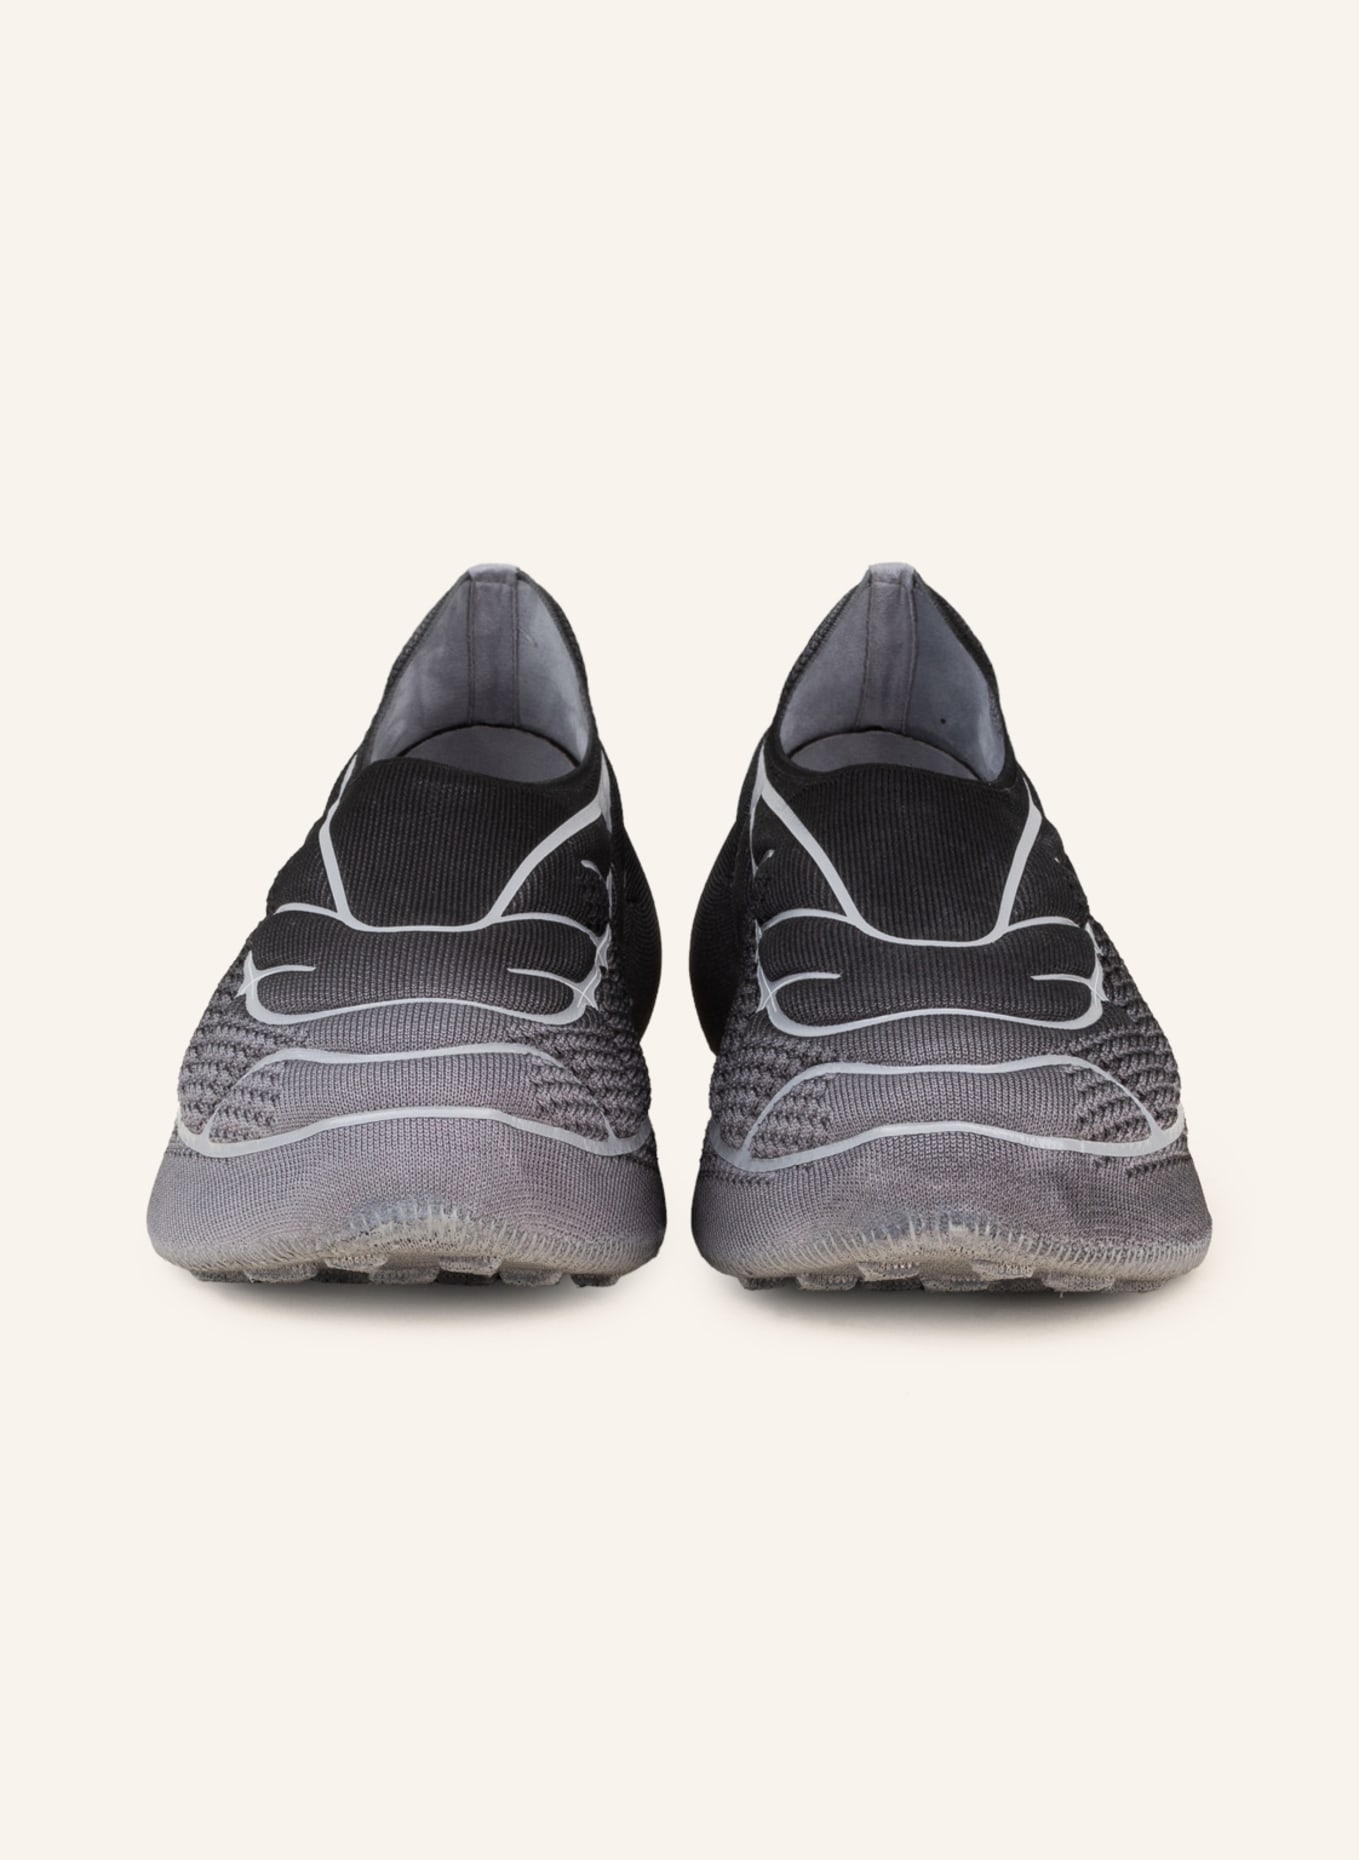 GIVENCHY Sneakers TK-360 PLUS, Color: DARK GRAY/ LIGHT GRAY/ GRAY (Image 3)